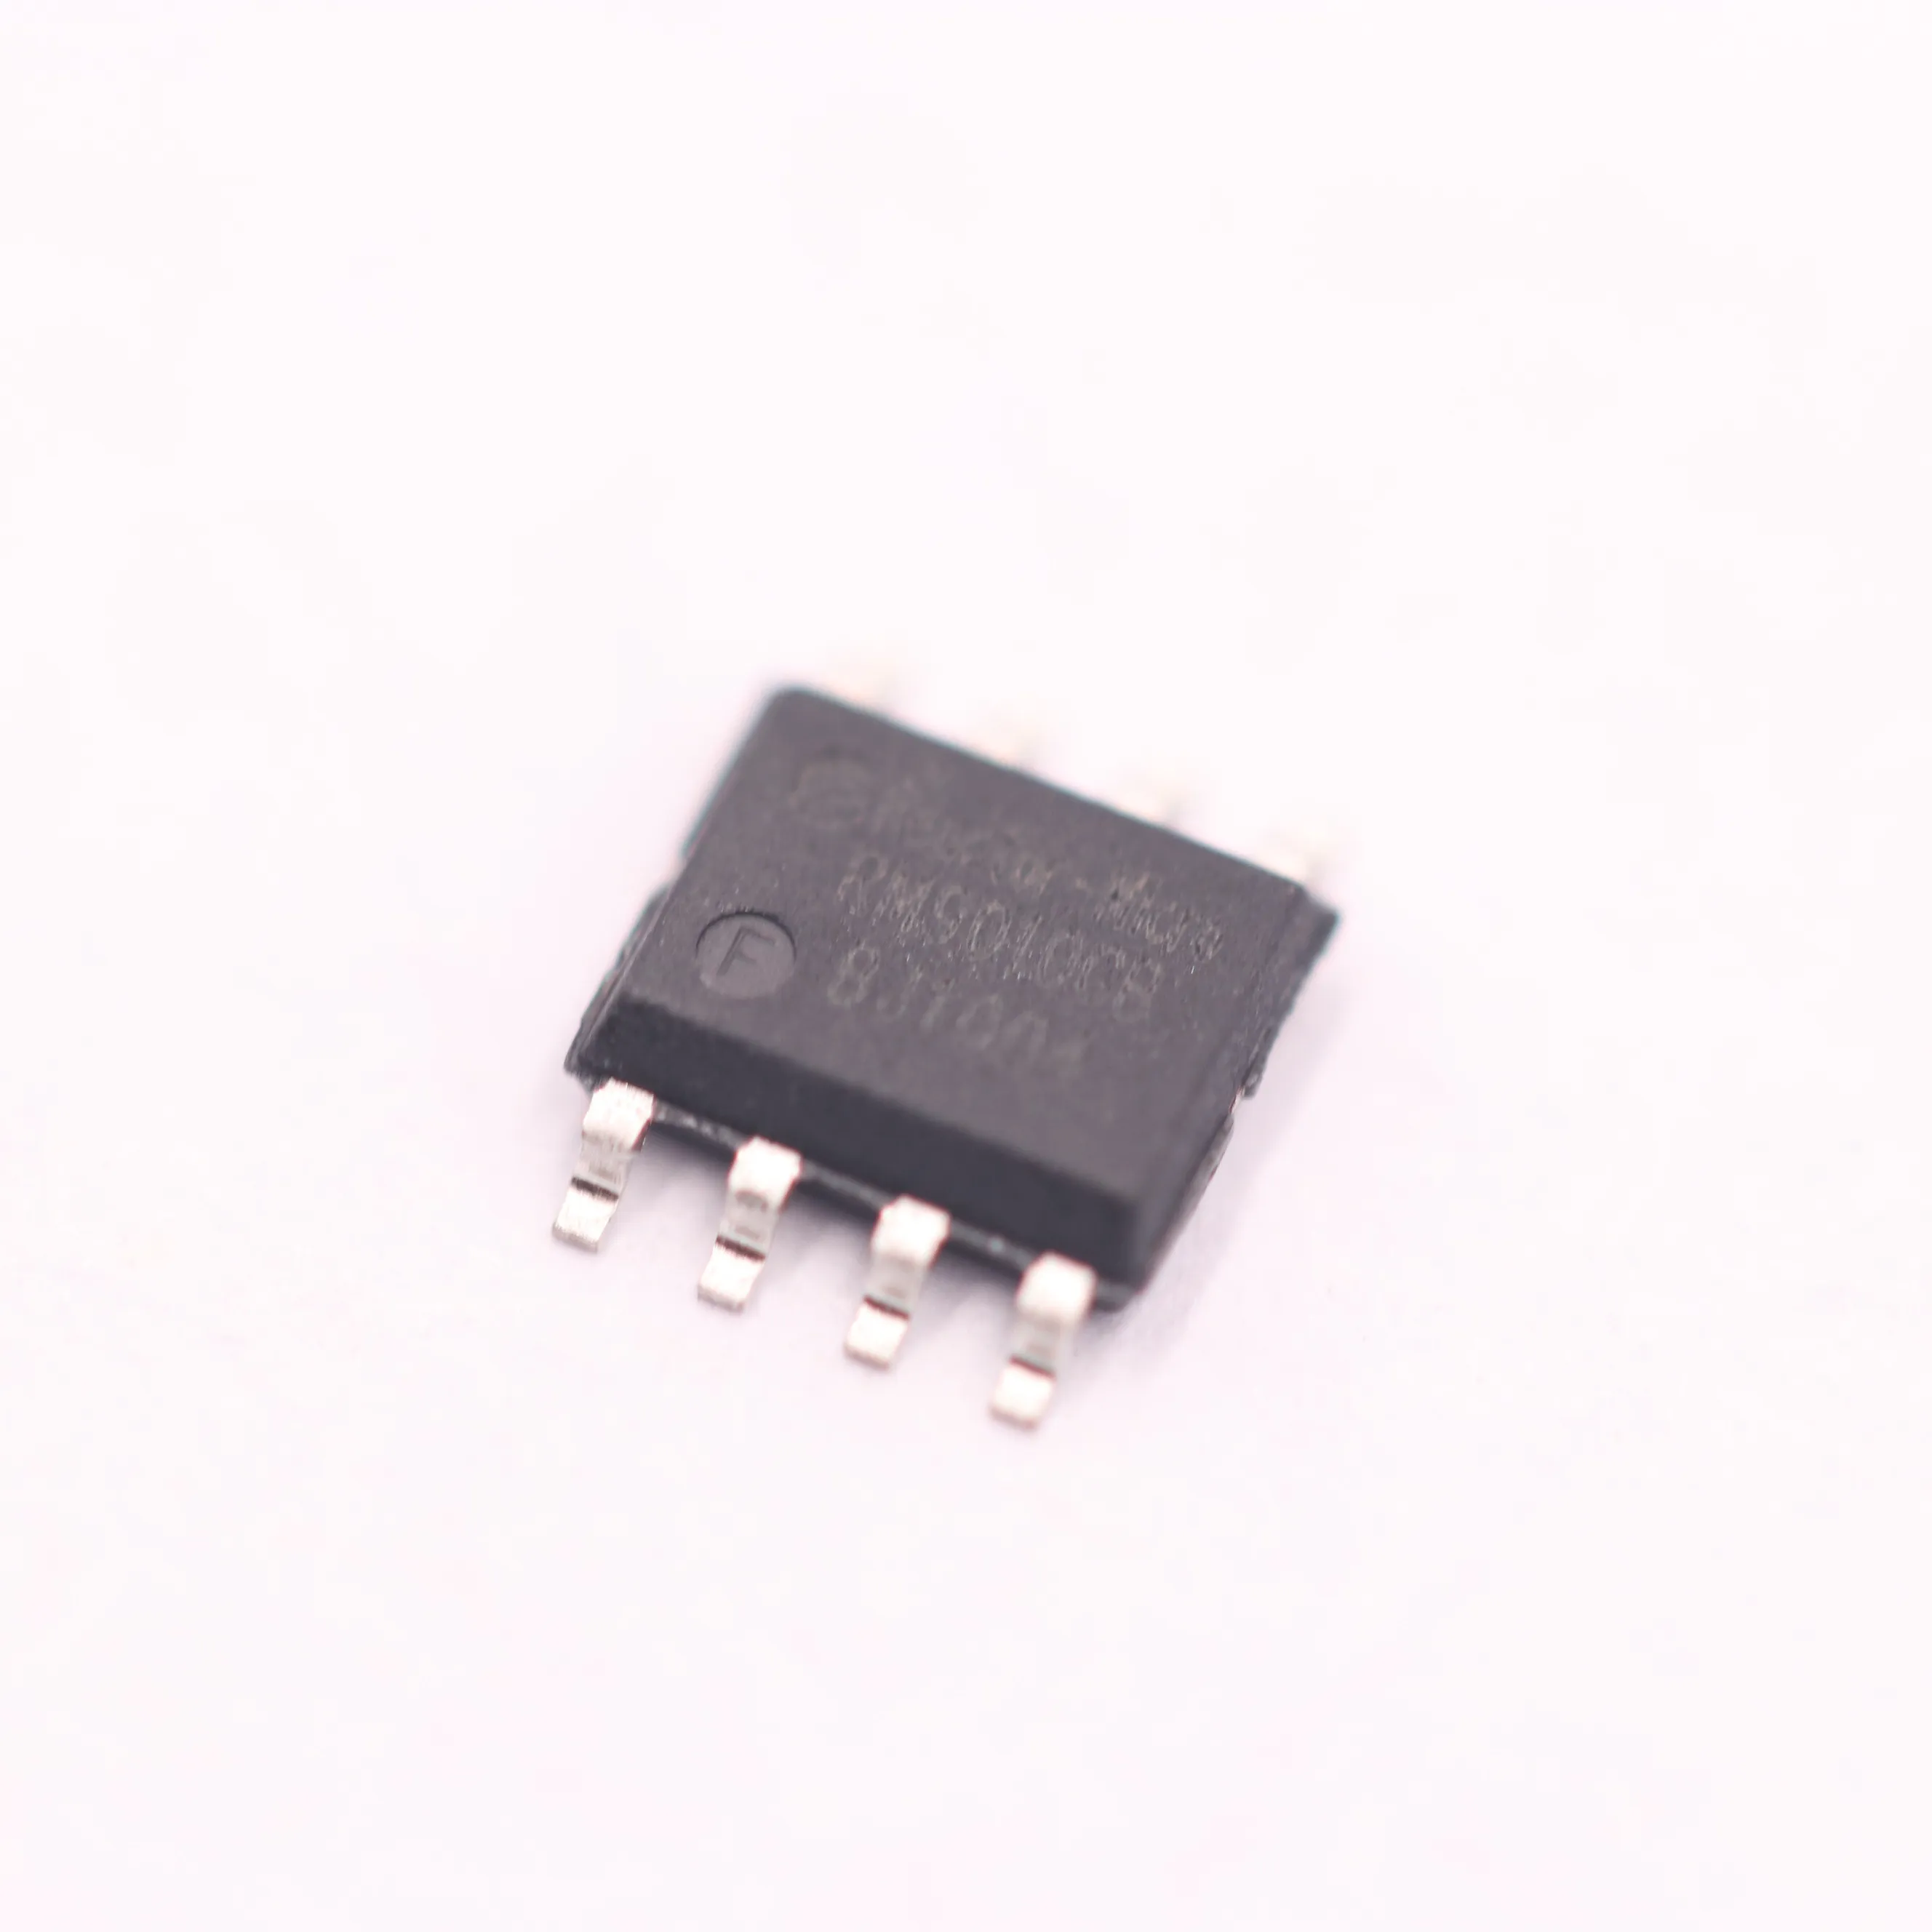 IC RM9010GB ESOP8 Single segment dimmable constant power LED control chip